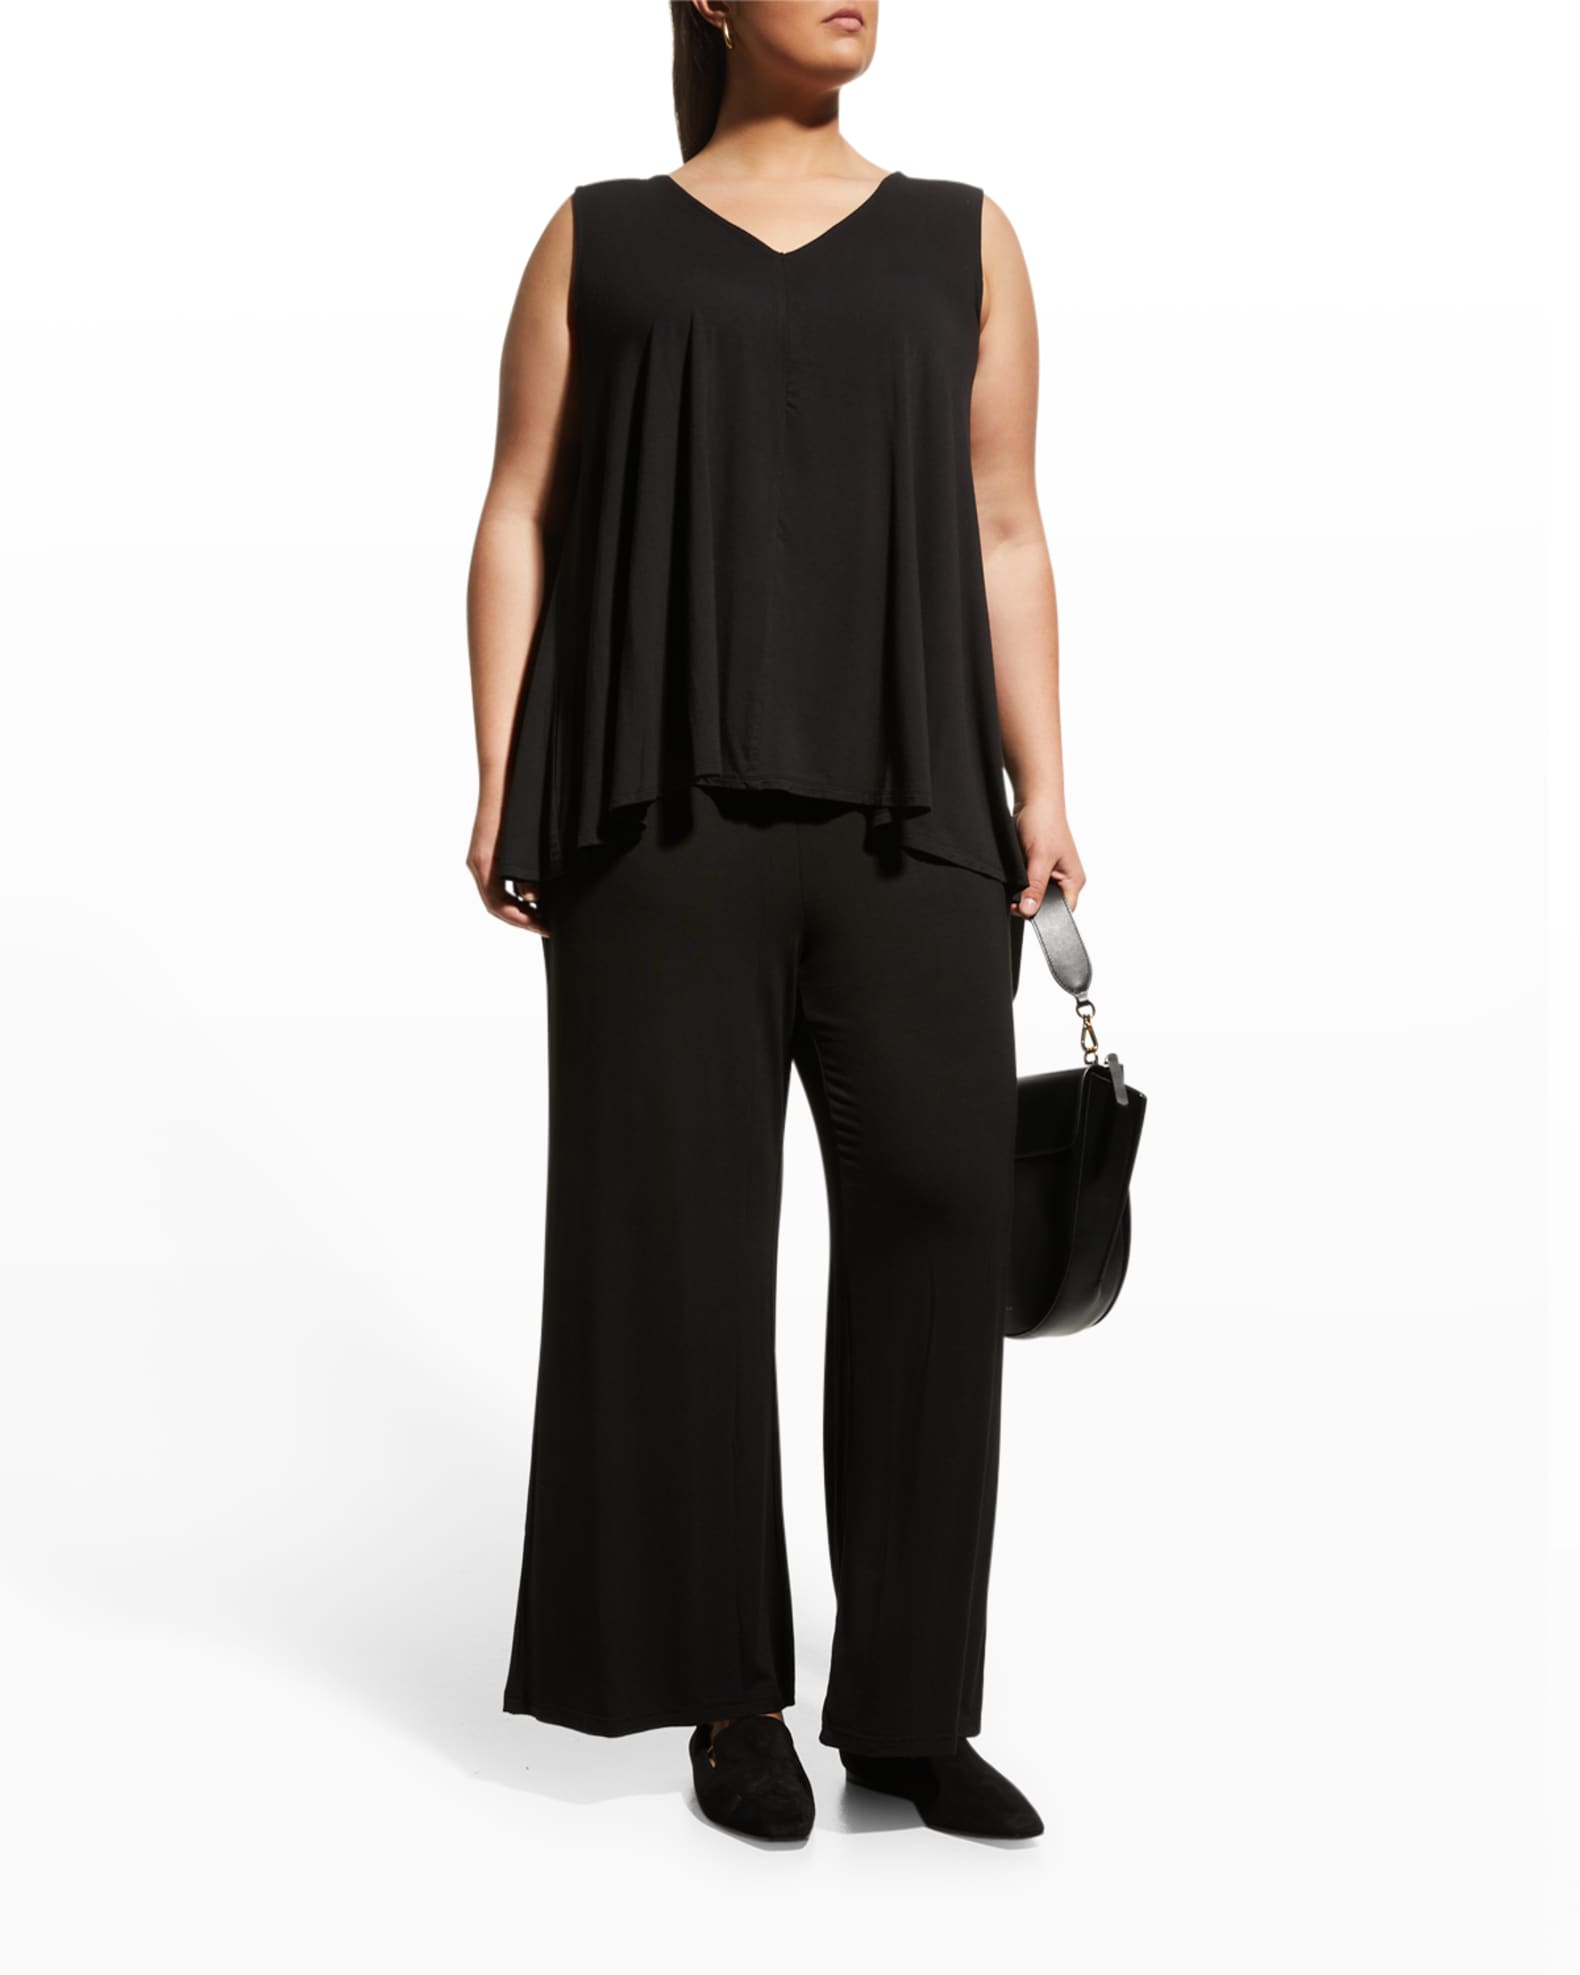 CAPSULE 121 Plus Size The Humility High-Rise Jersey Pants | Neiman Marcus